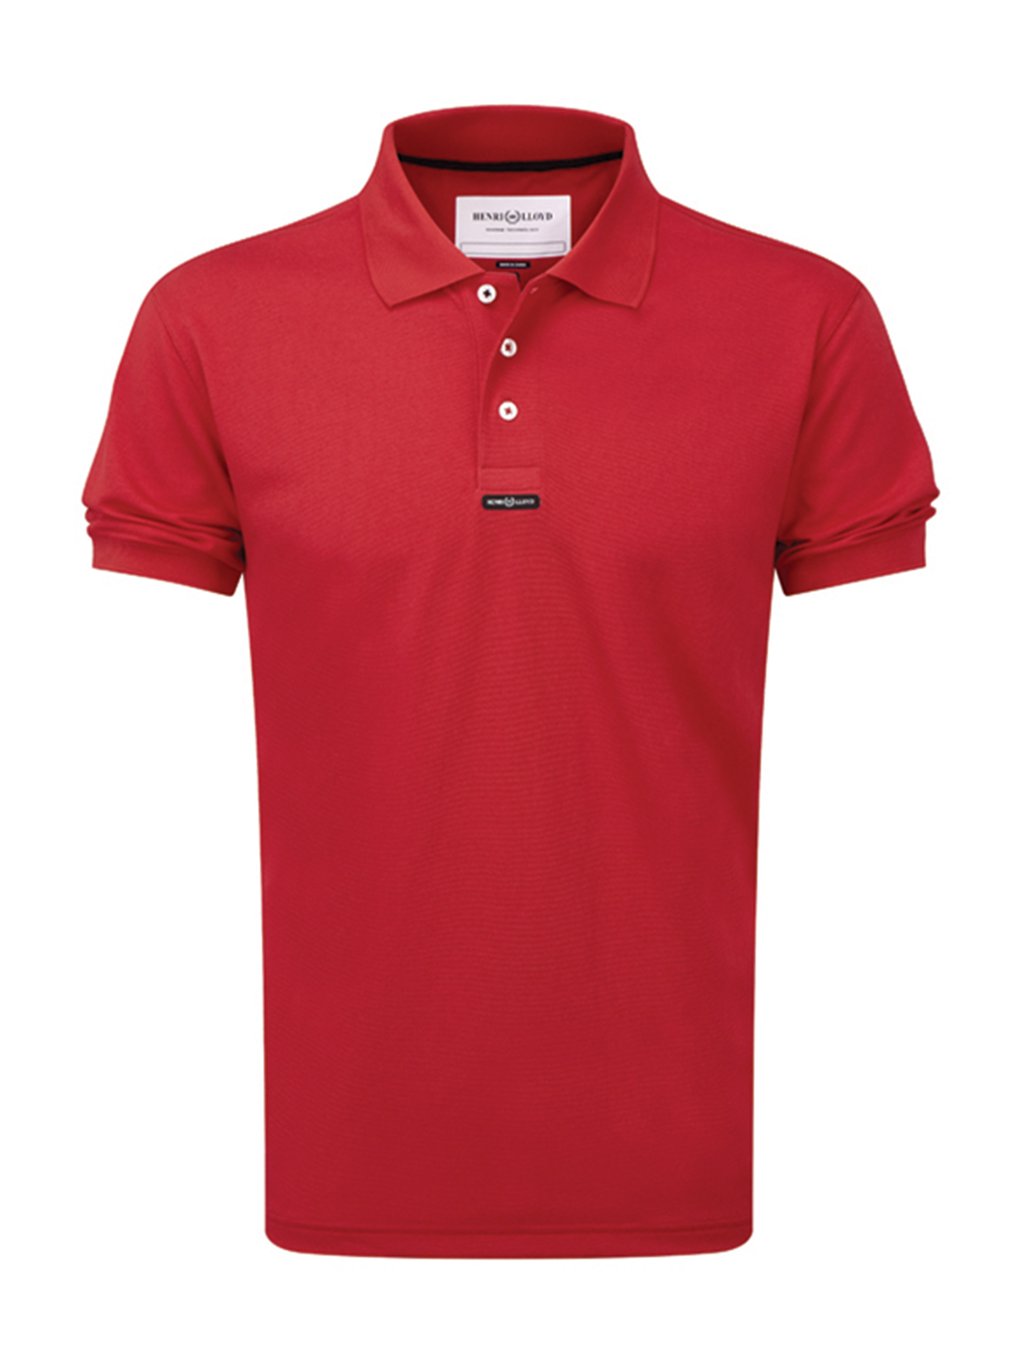 Henri Lloyd Fast Dri Polo Red - ONLY SIZES    XLARGE & XXLARGE LEFT ! DISCONTINUED STYLE - LAST STOCK